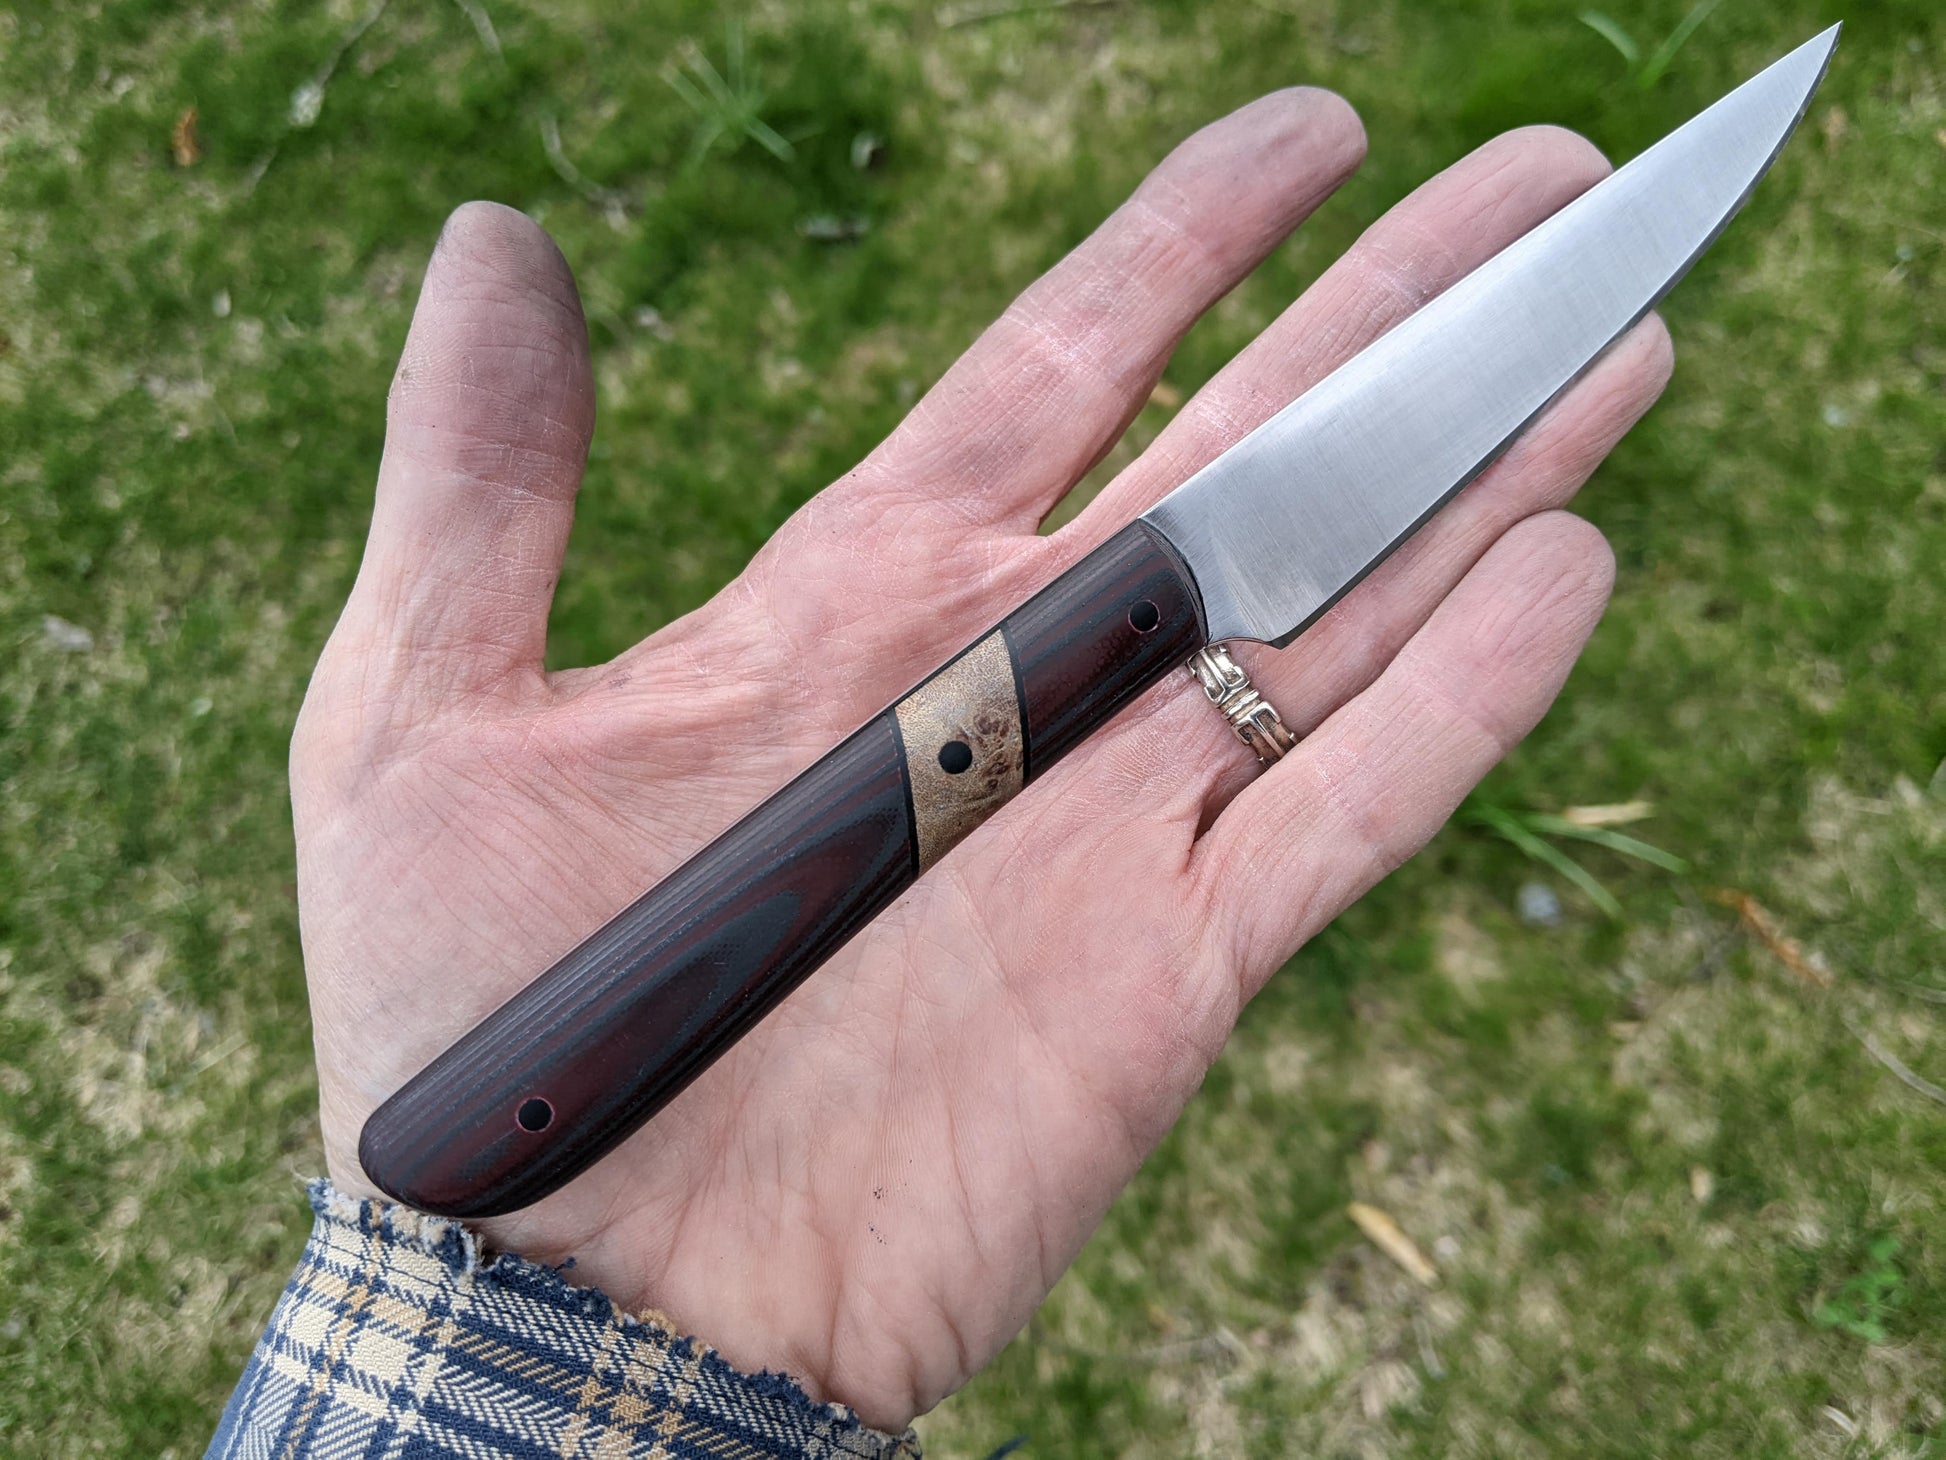 paring knife in hand